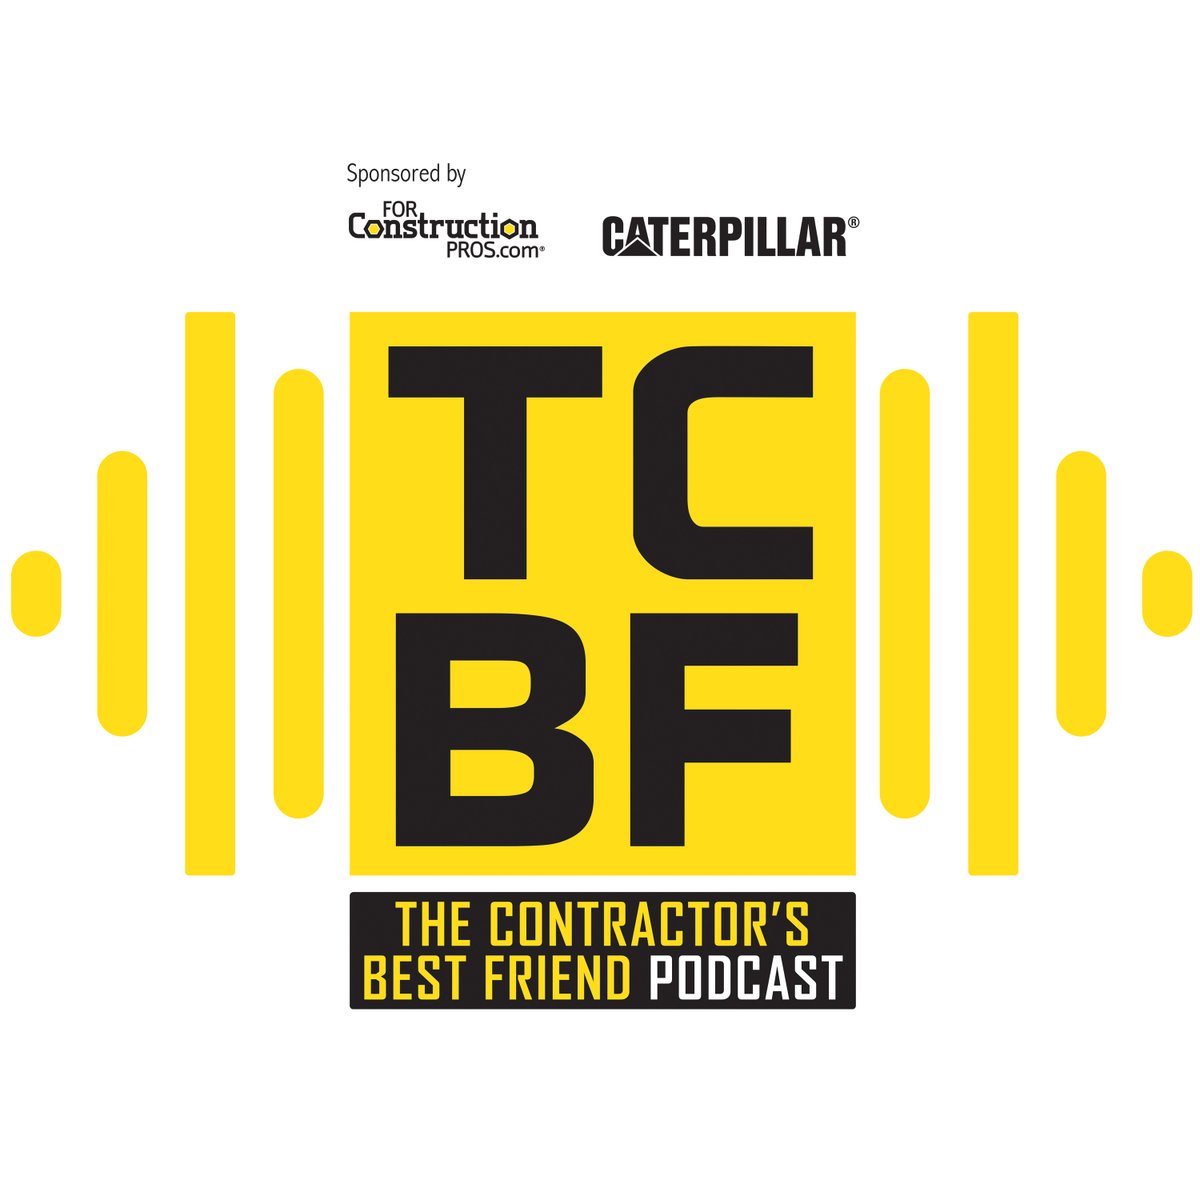 As construction industry equipment theft continues to be a problem, the latest technology can help prevent such theft and keep crews safe. Learn more from this @CaterpillarInc #podcast >> bit.ly/45PsZfM | @4ConstructnPros #TheContractorsBestFriend